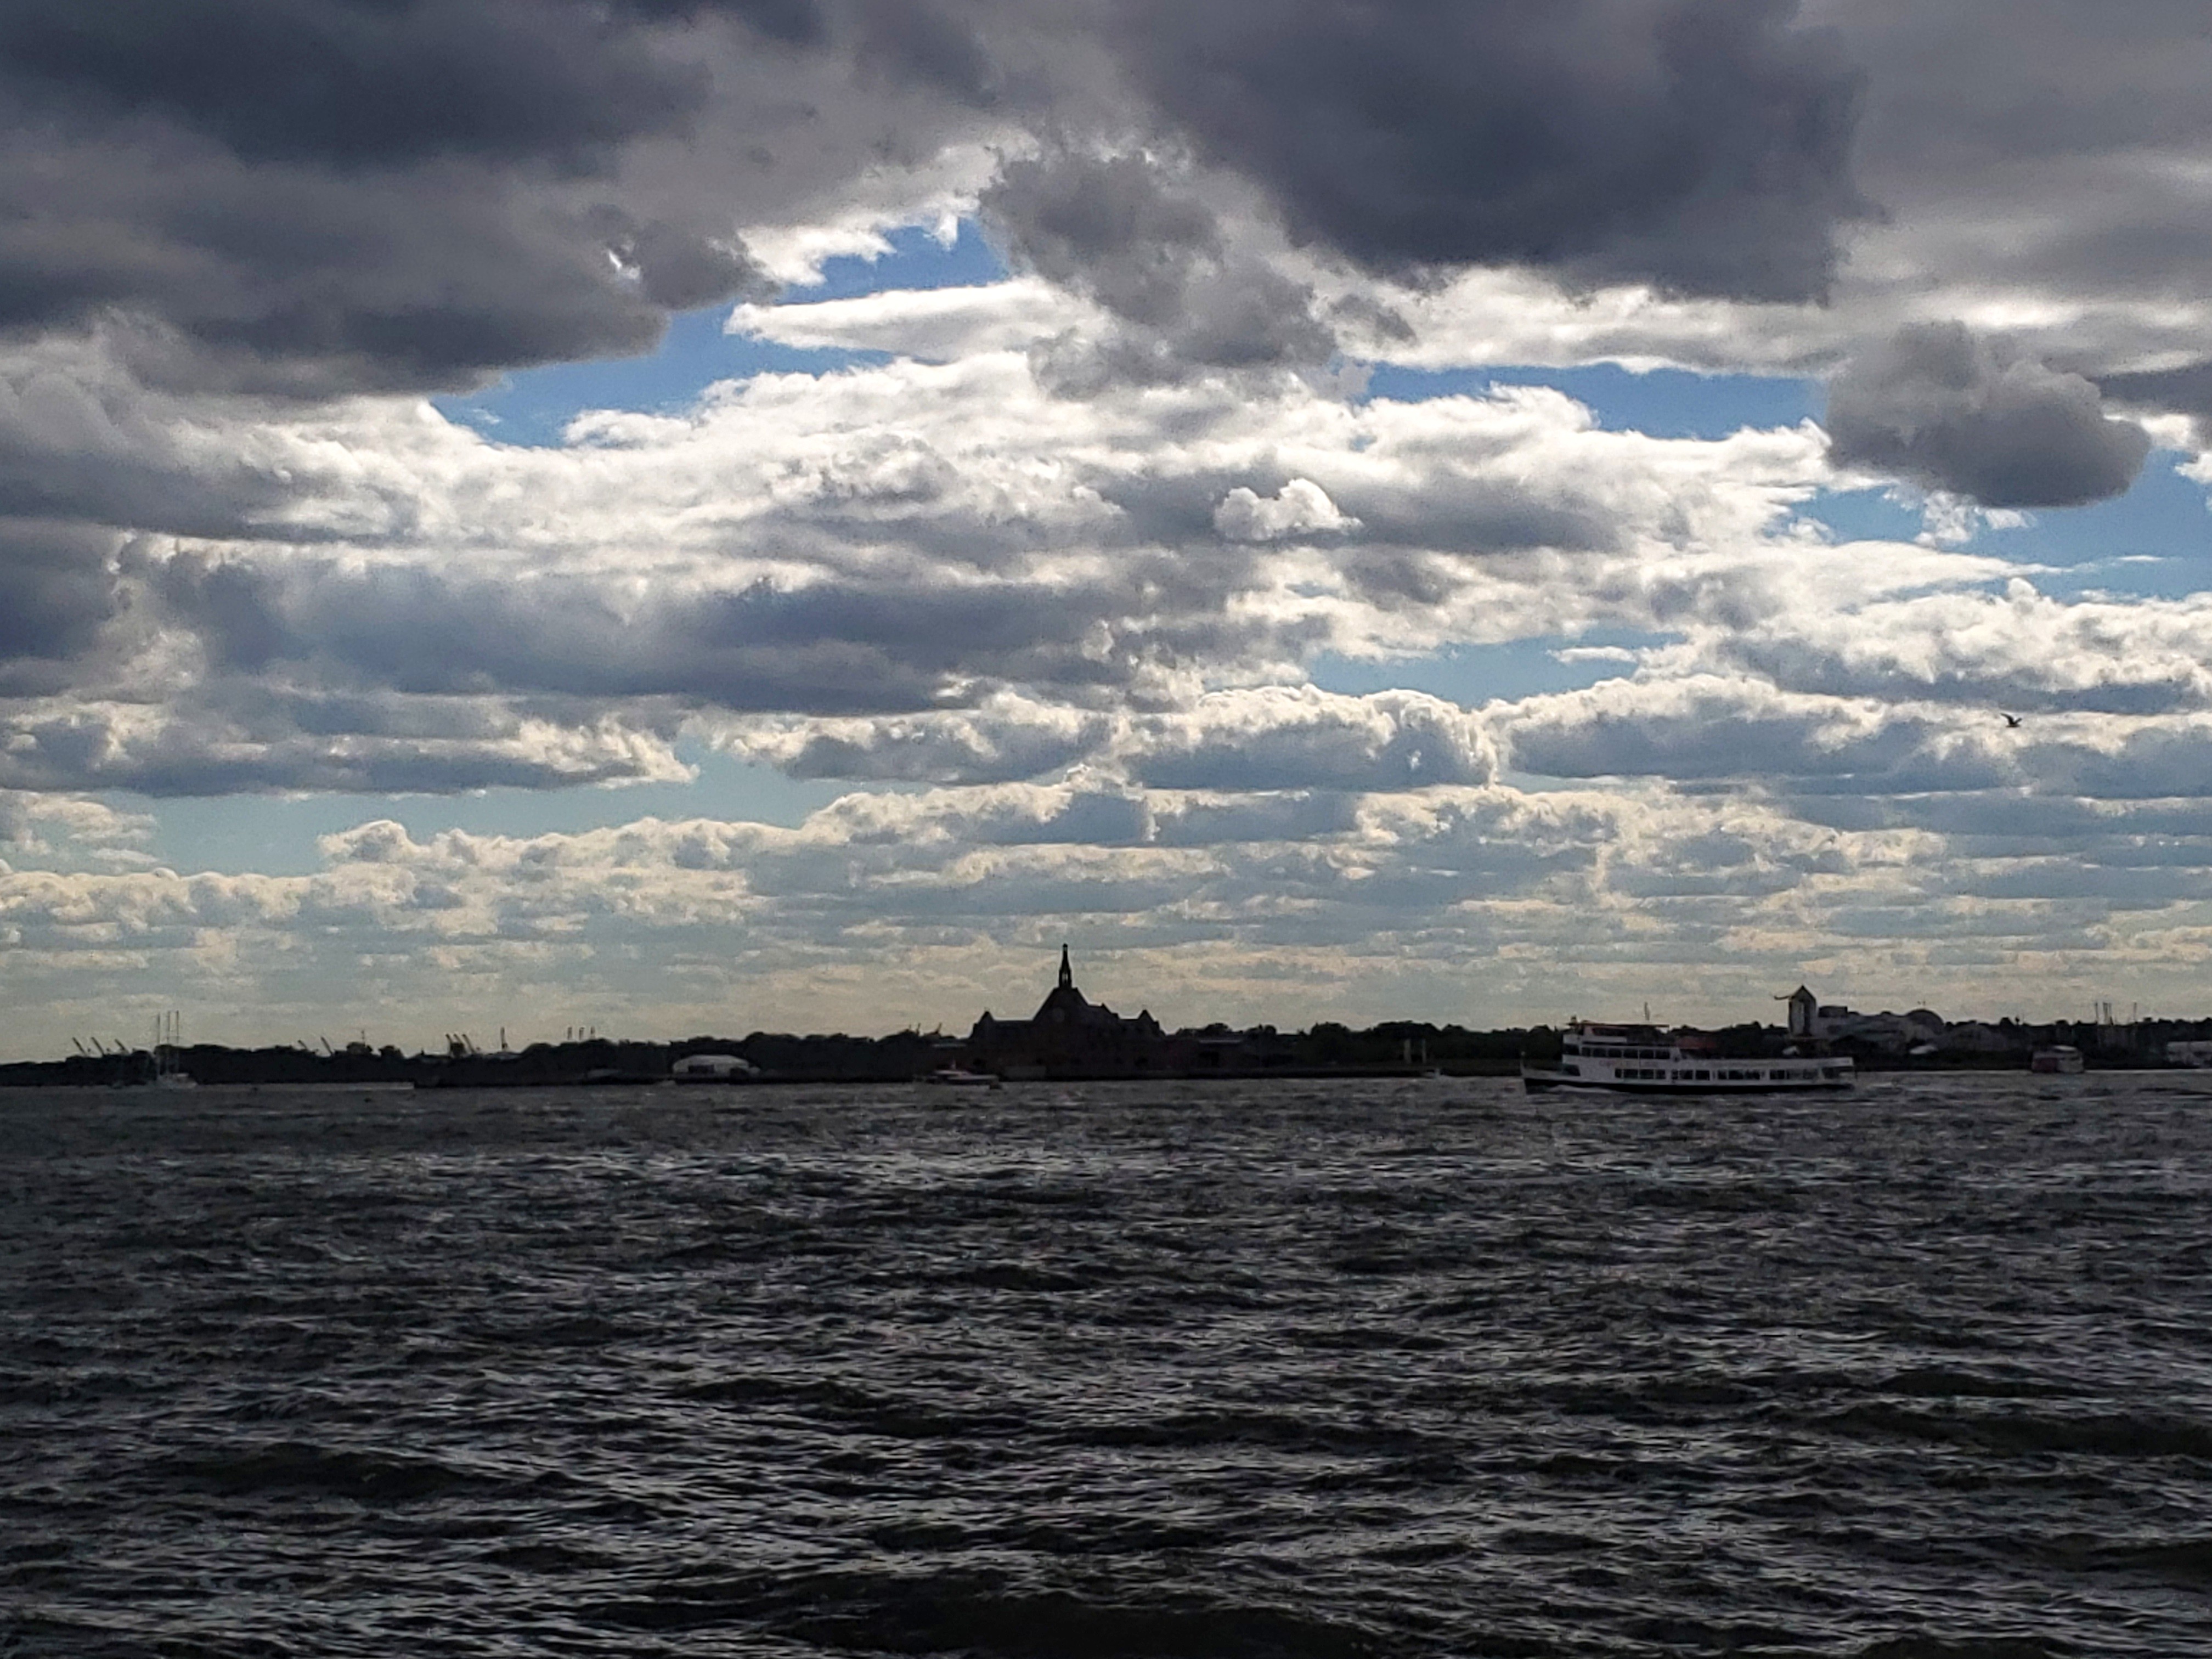 Statue of Liberty covered by an ocean of clouds